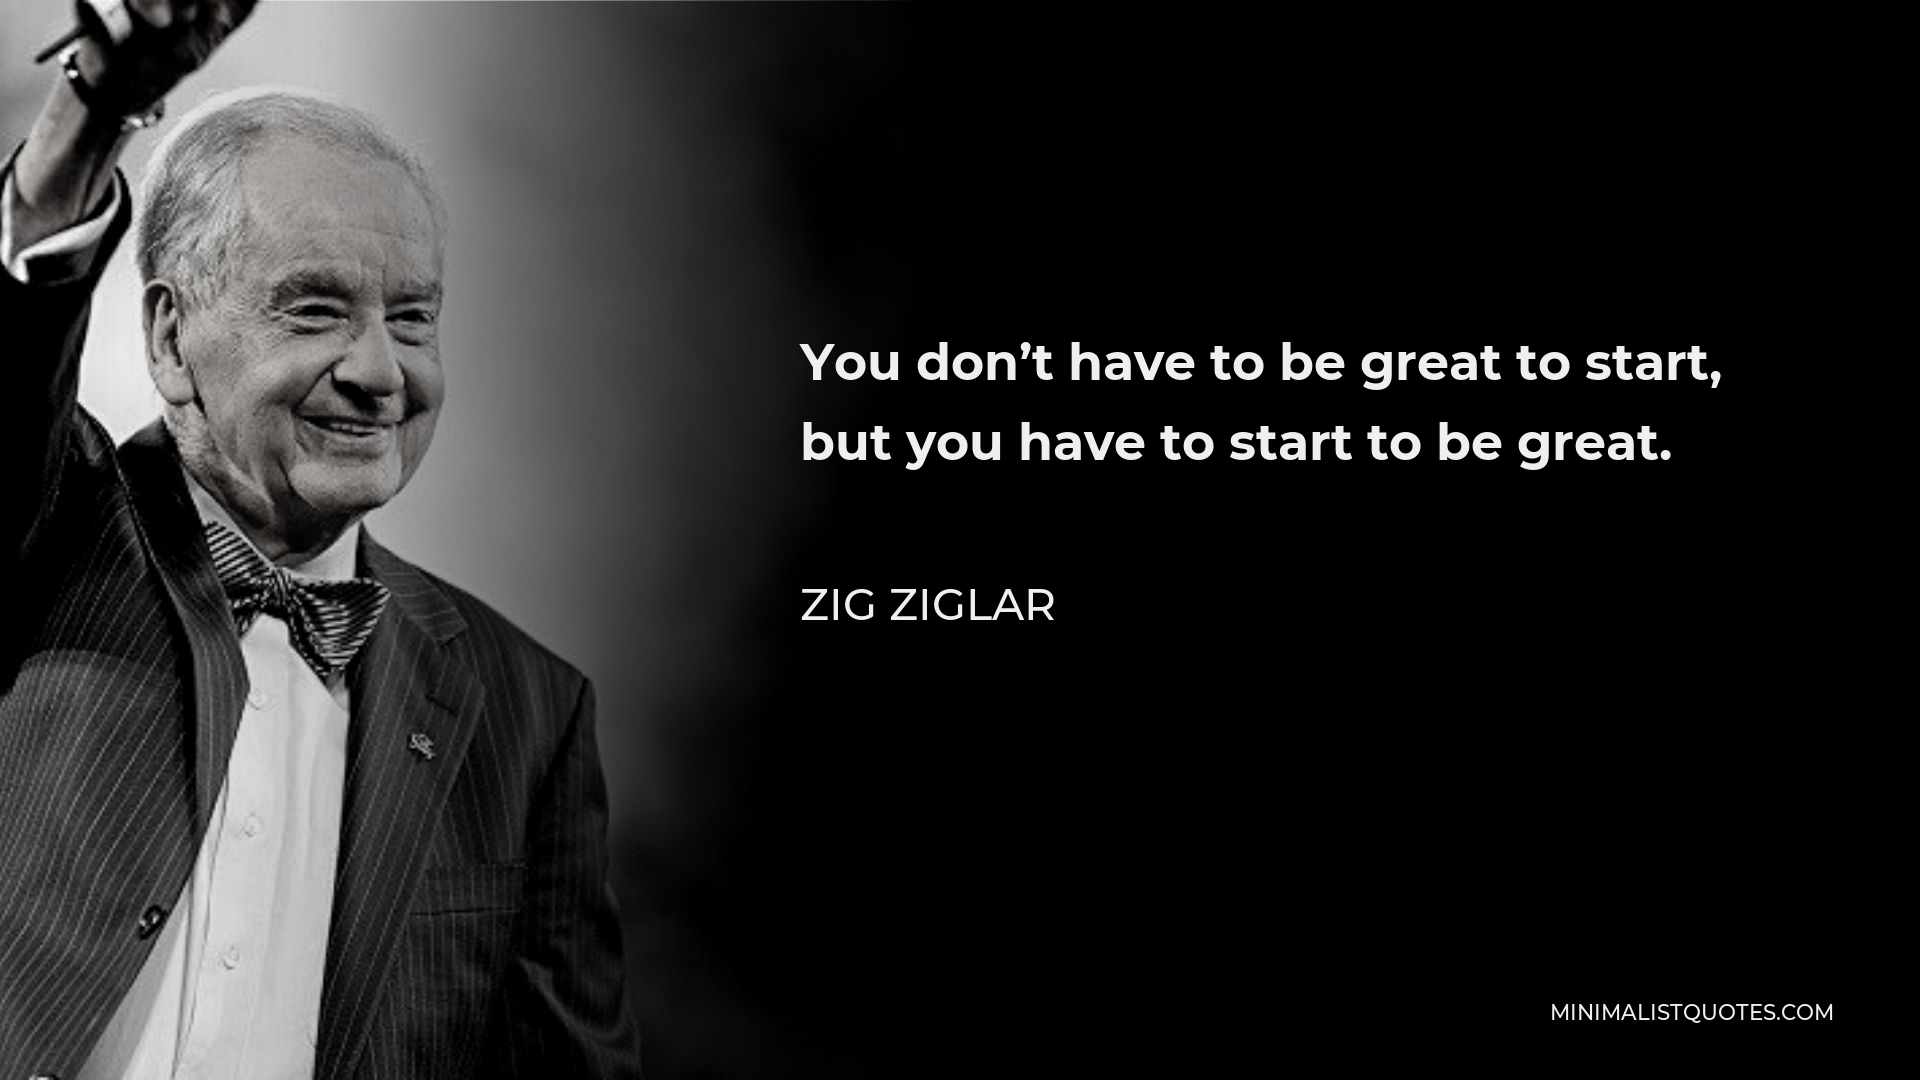 Zig Ziglar Quote - You don’t have to be great to start, but you have to start to be great.